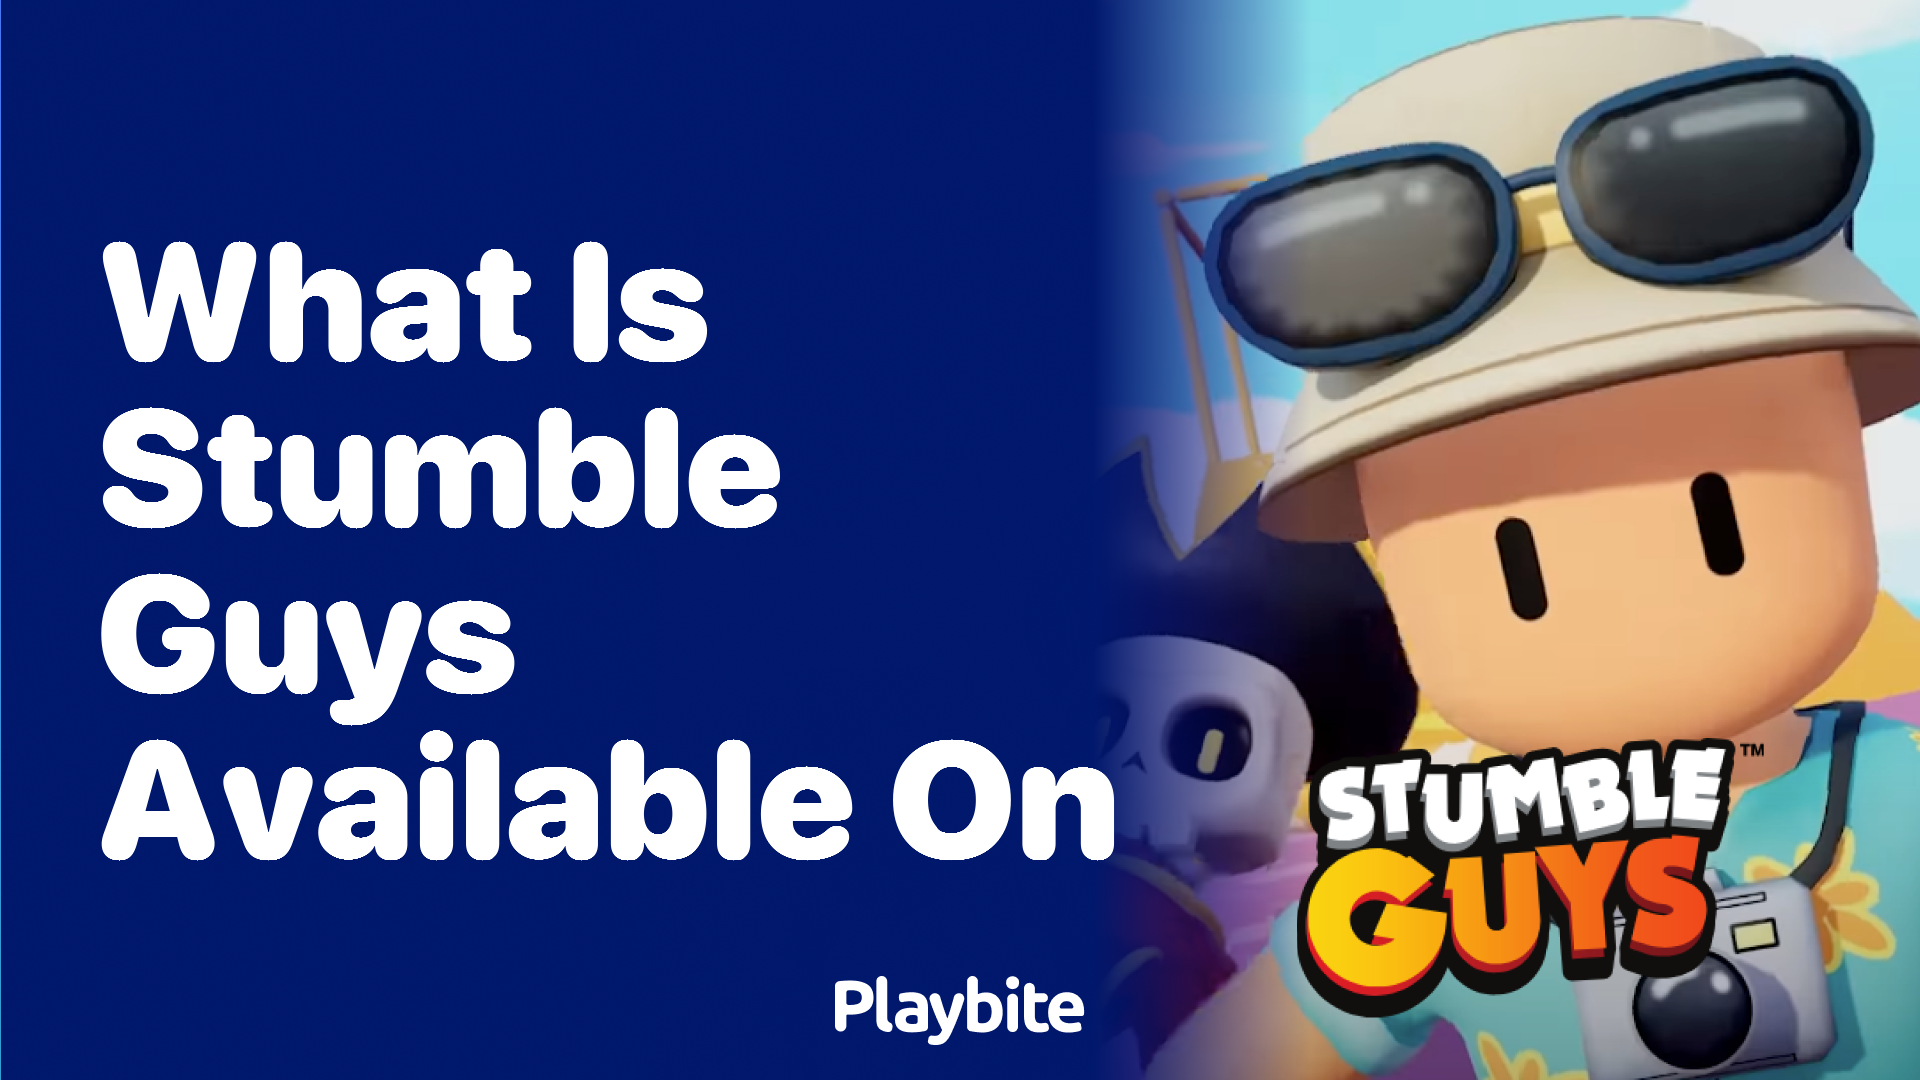 What Platforms Can You Play Stumble Guys On?